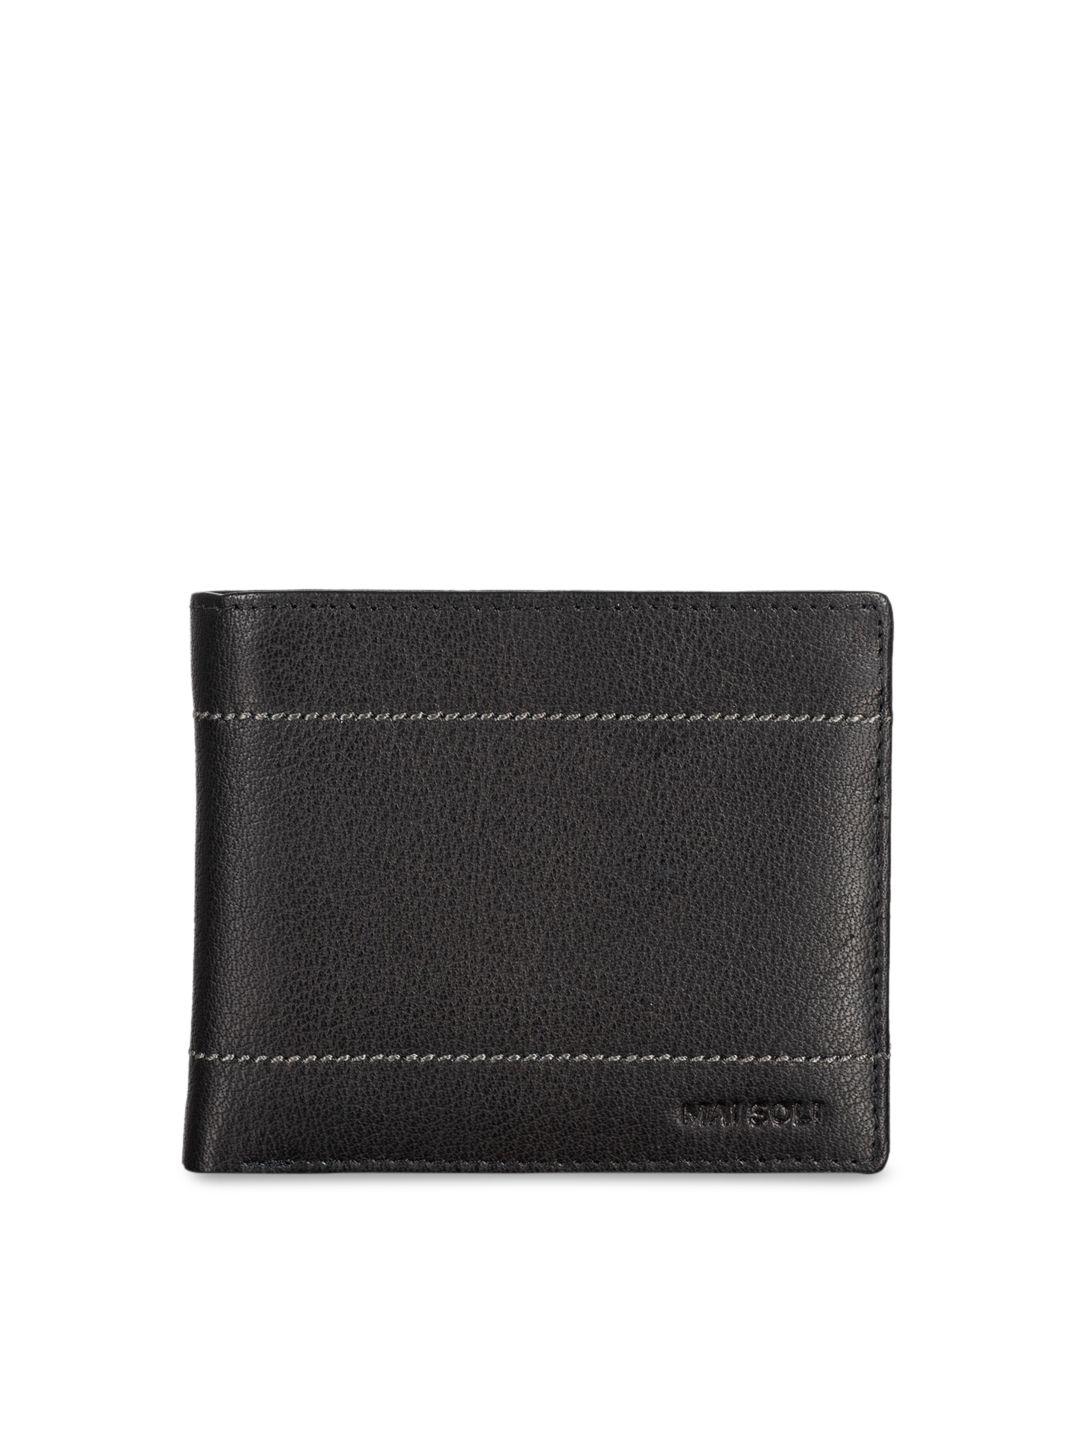 mai soli men black solid leather two fold wallet